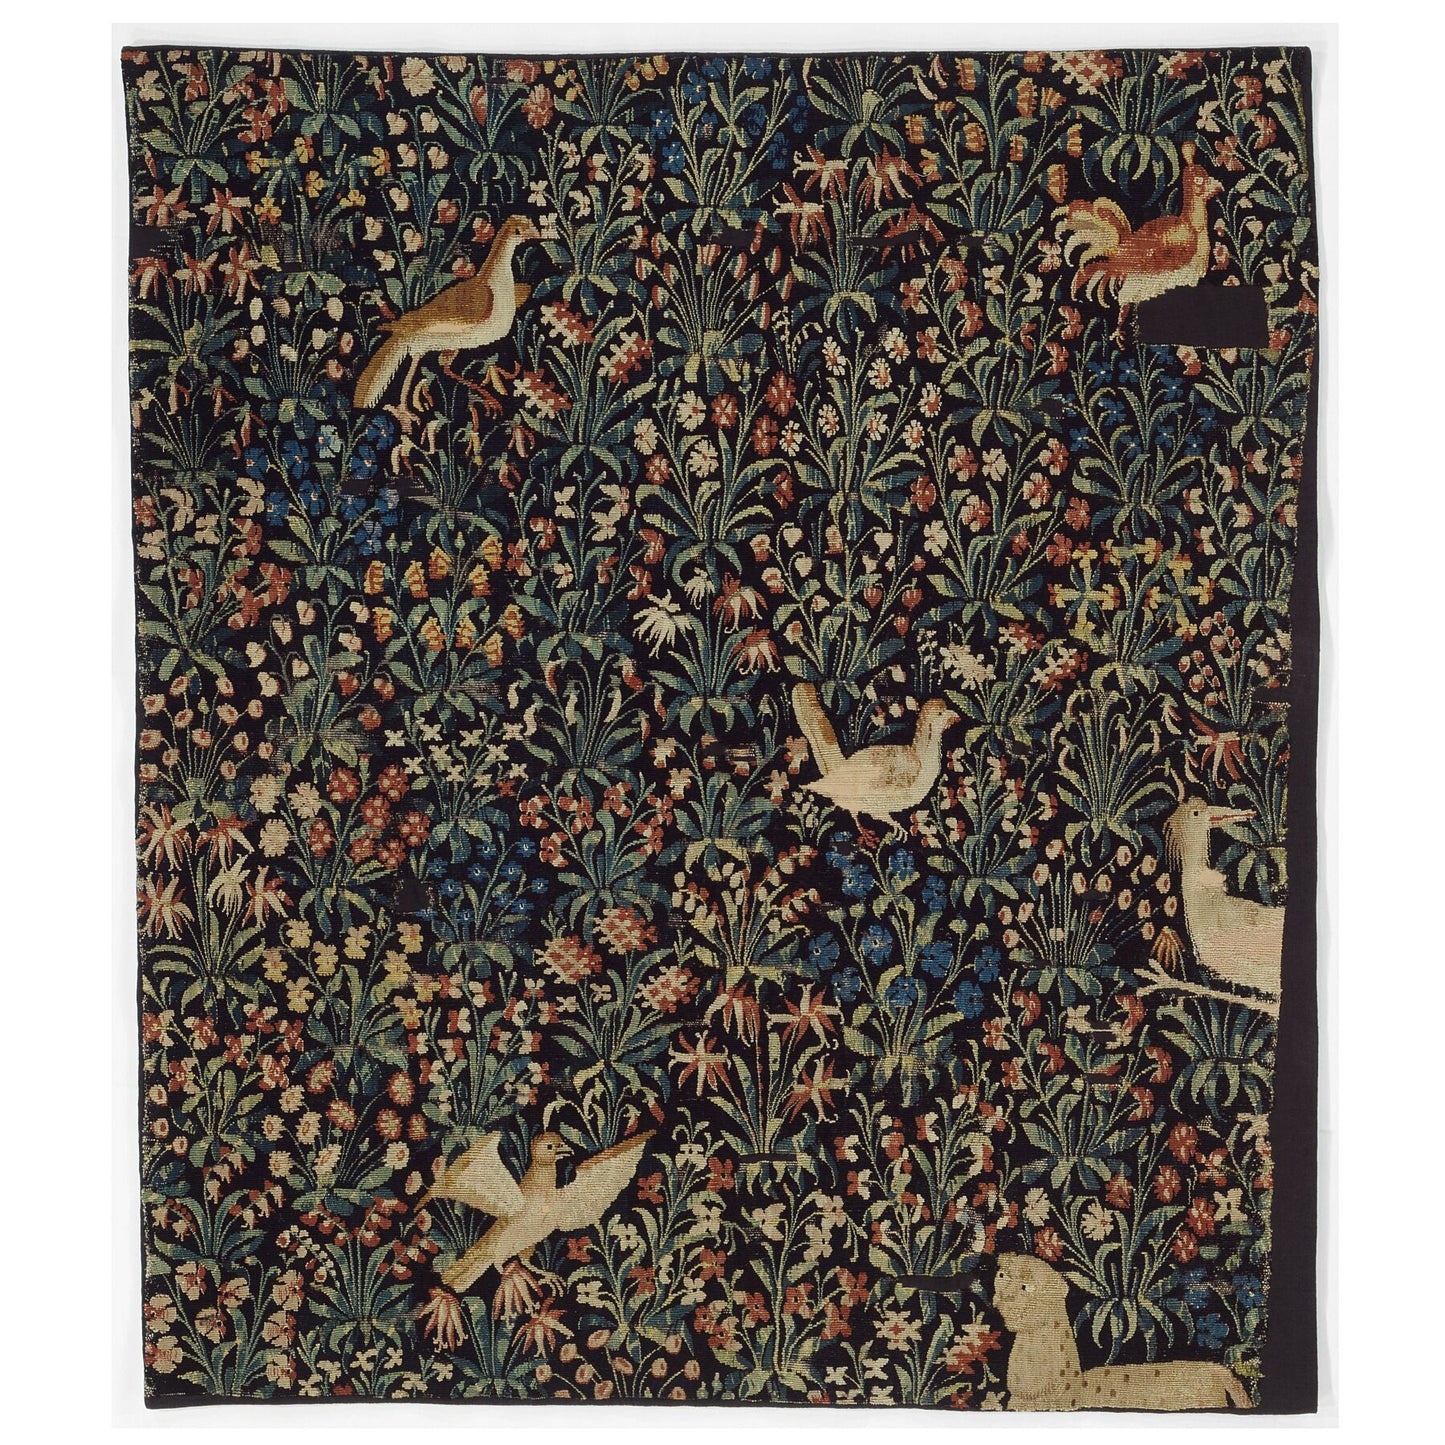 Millefleurs with Animals (Fragment), anonymous, c. 1525 - c. 1550